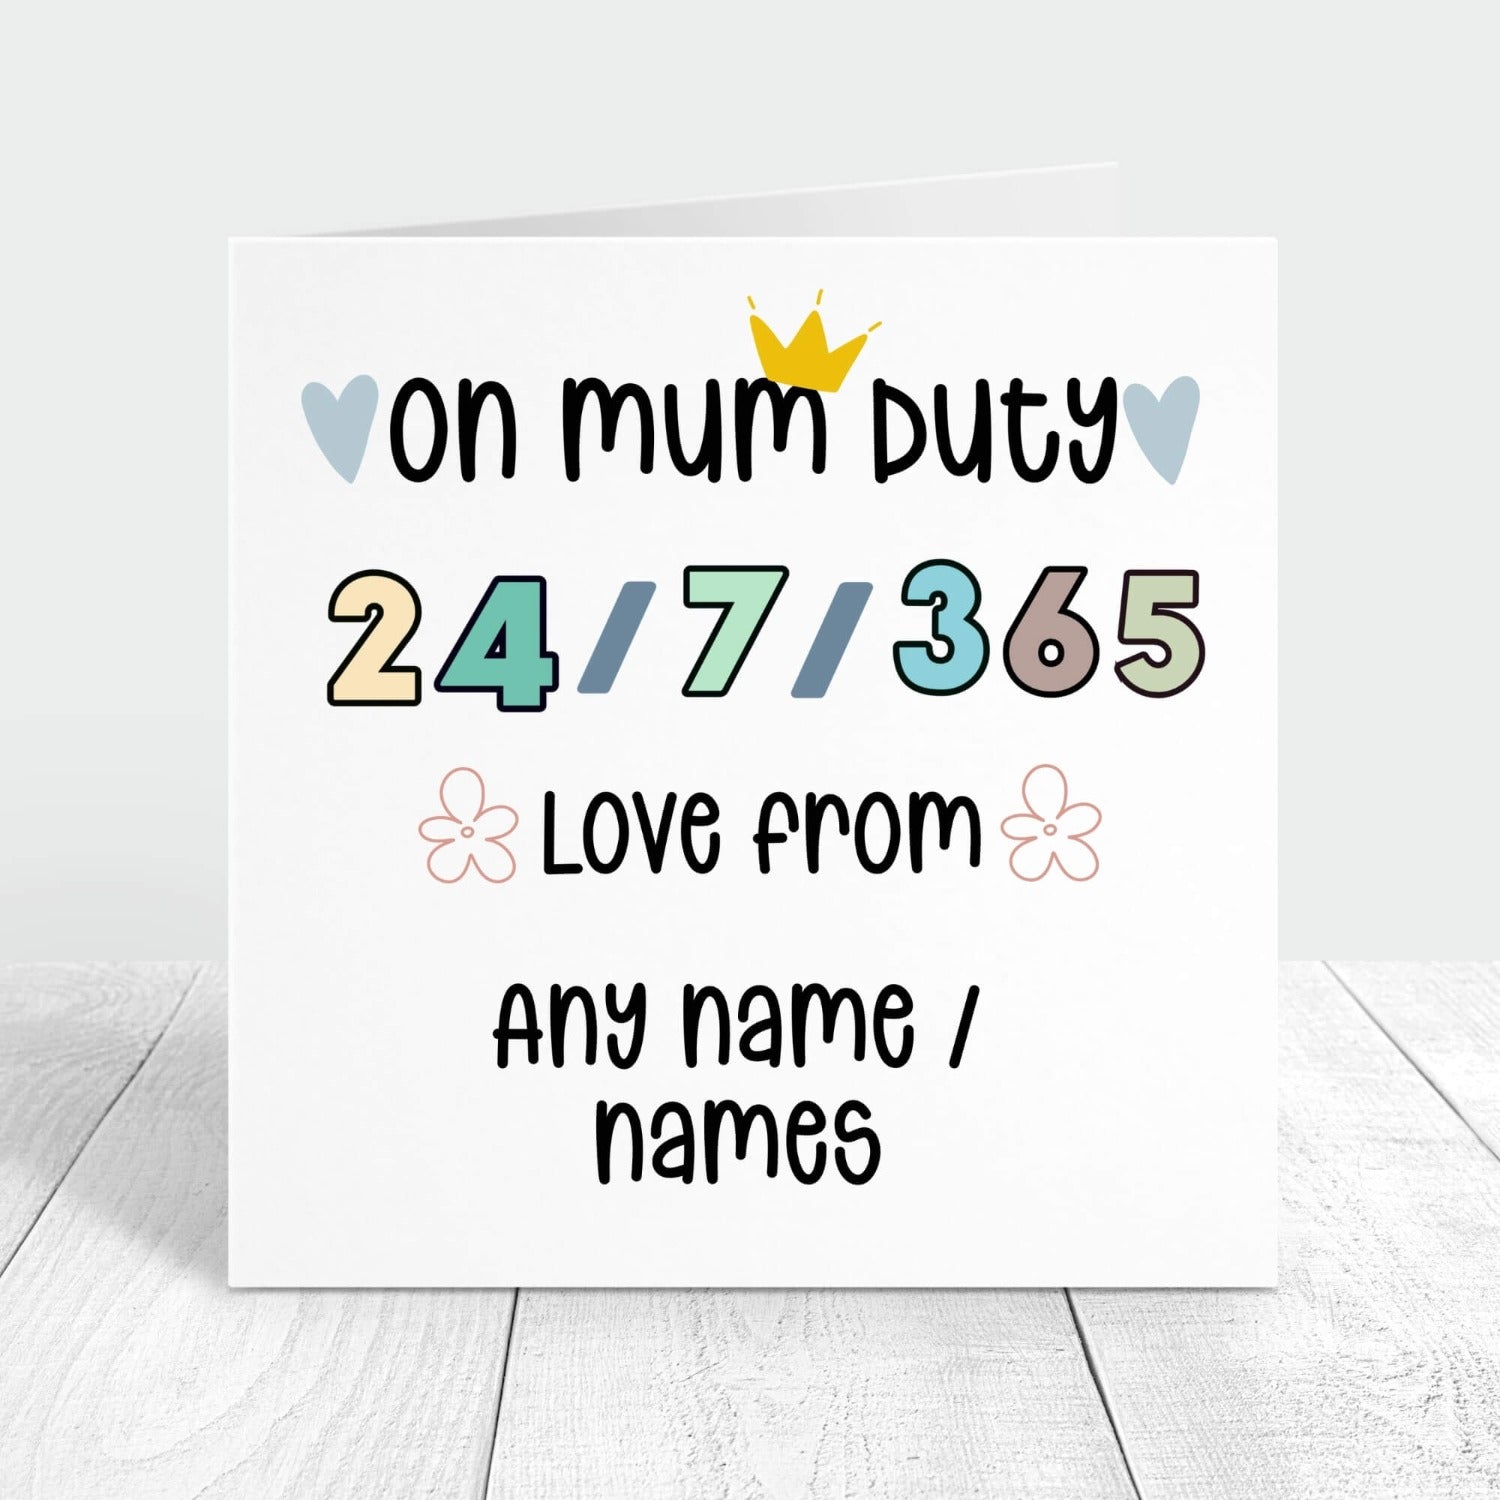 on mum duty 24/7/365 funny personalised card